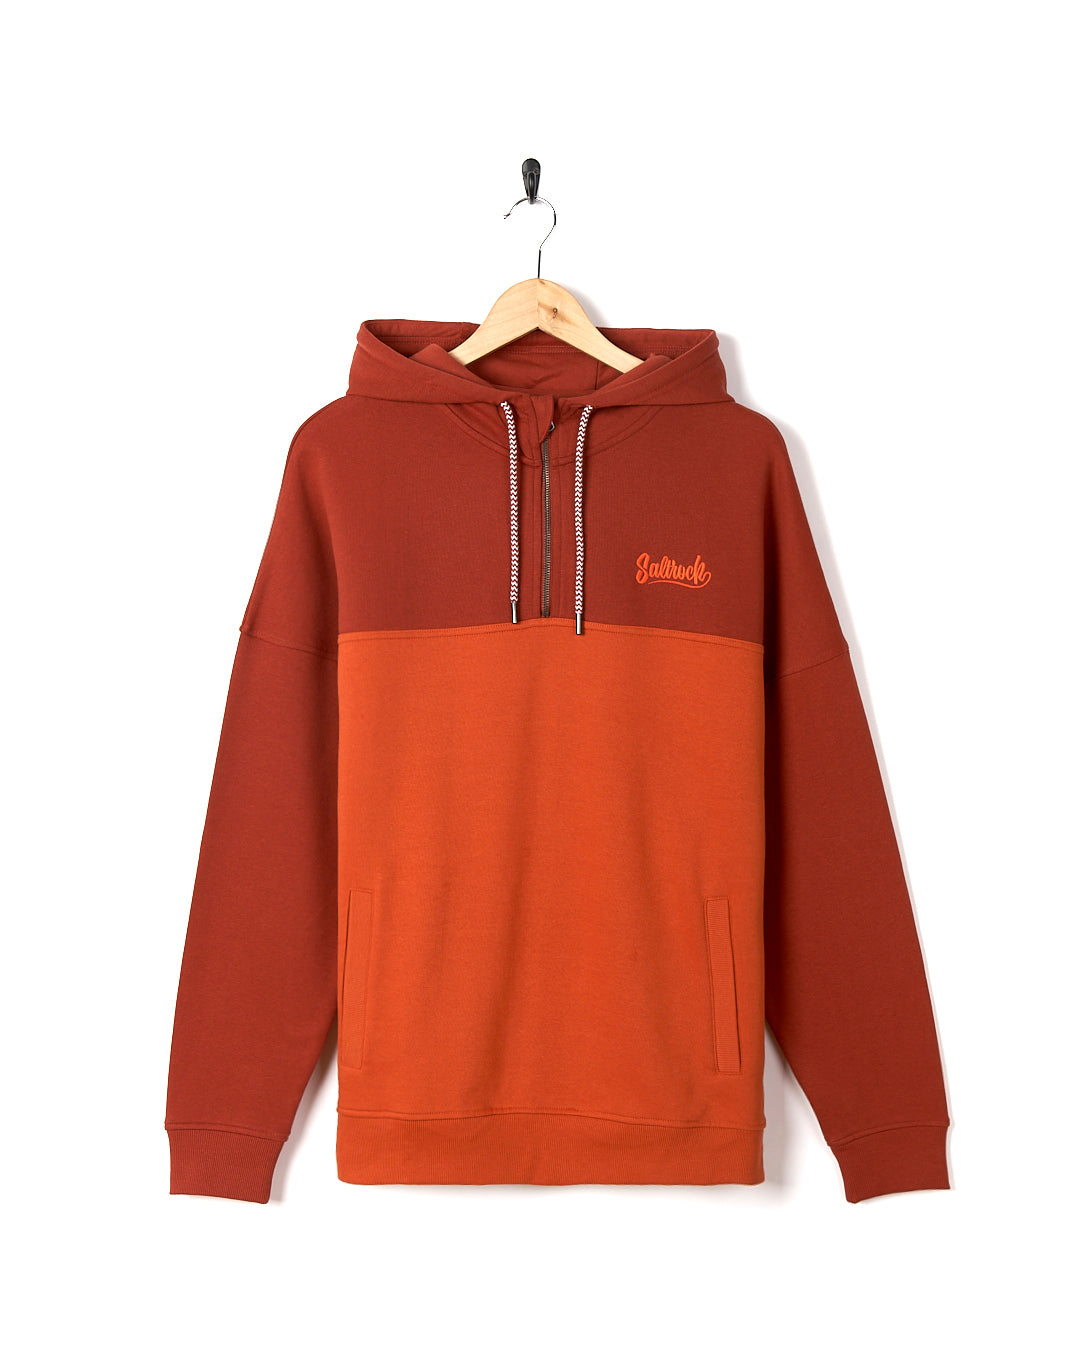 Speed Embroidery - Mens 1/4 Neck Zip - Red